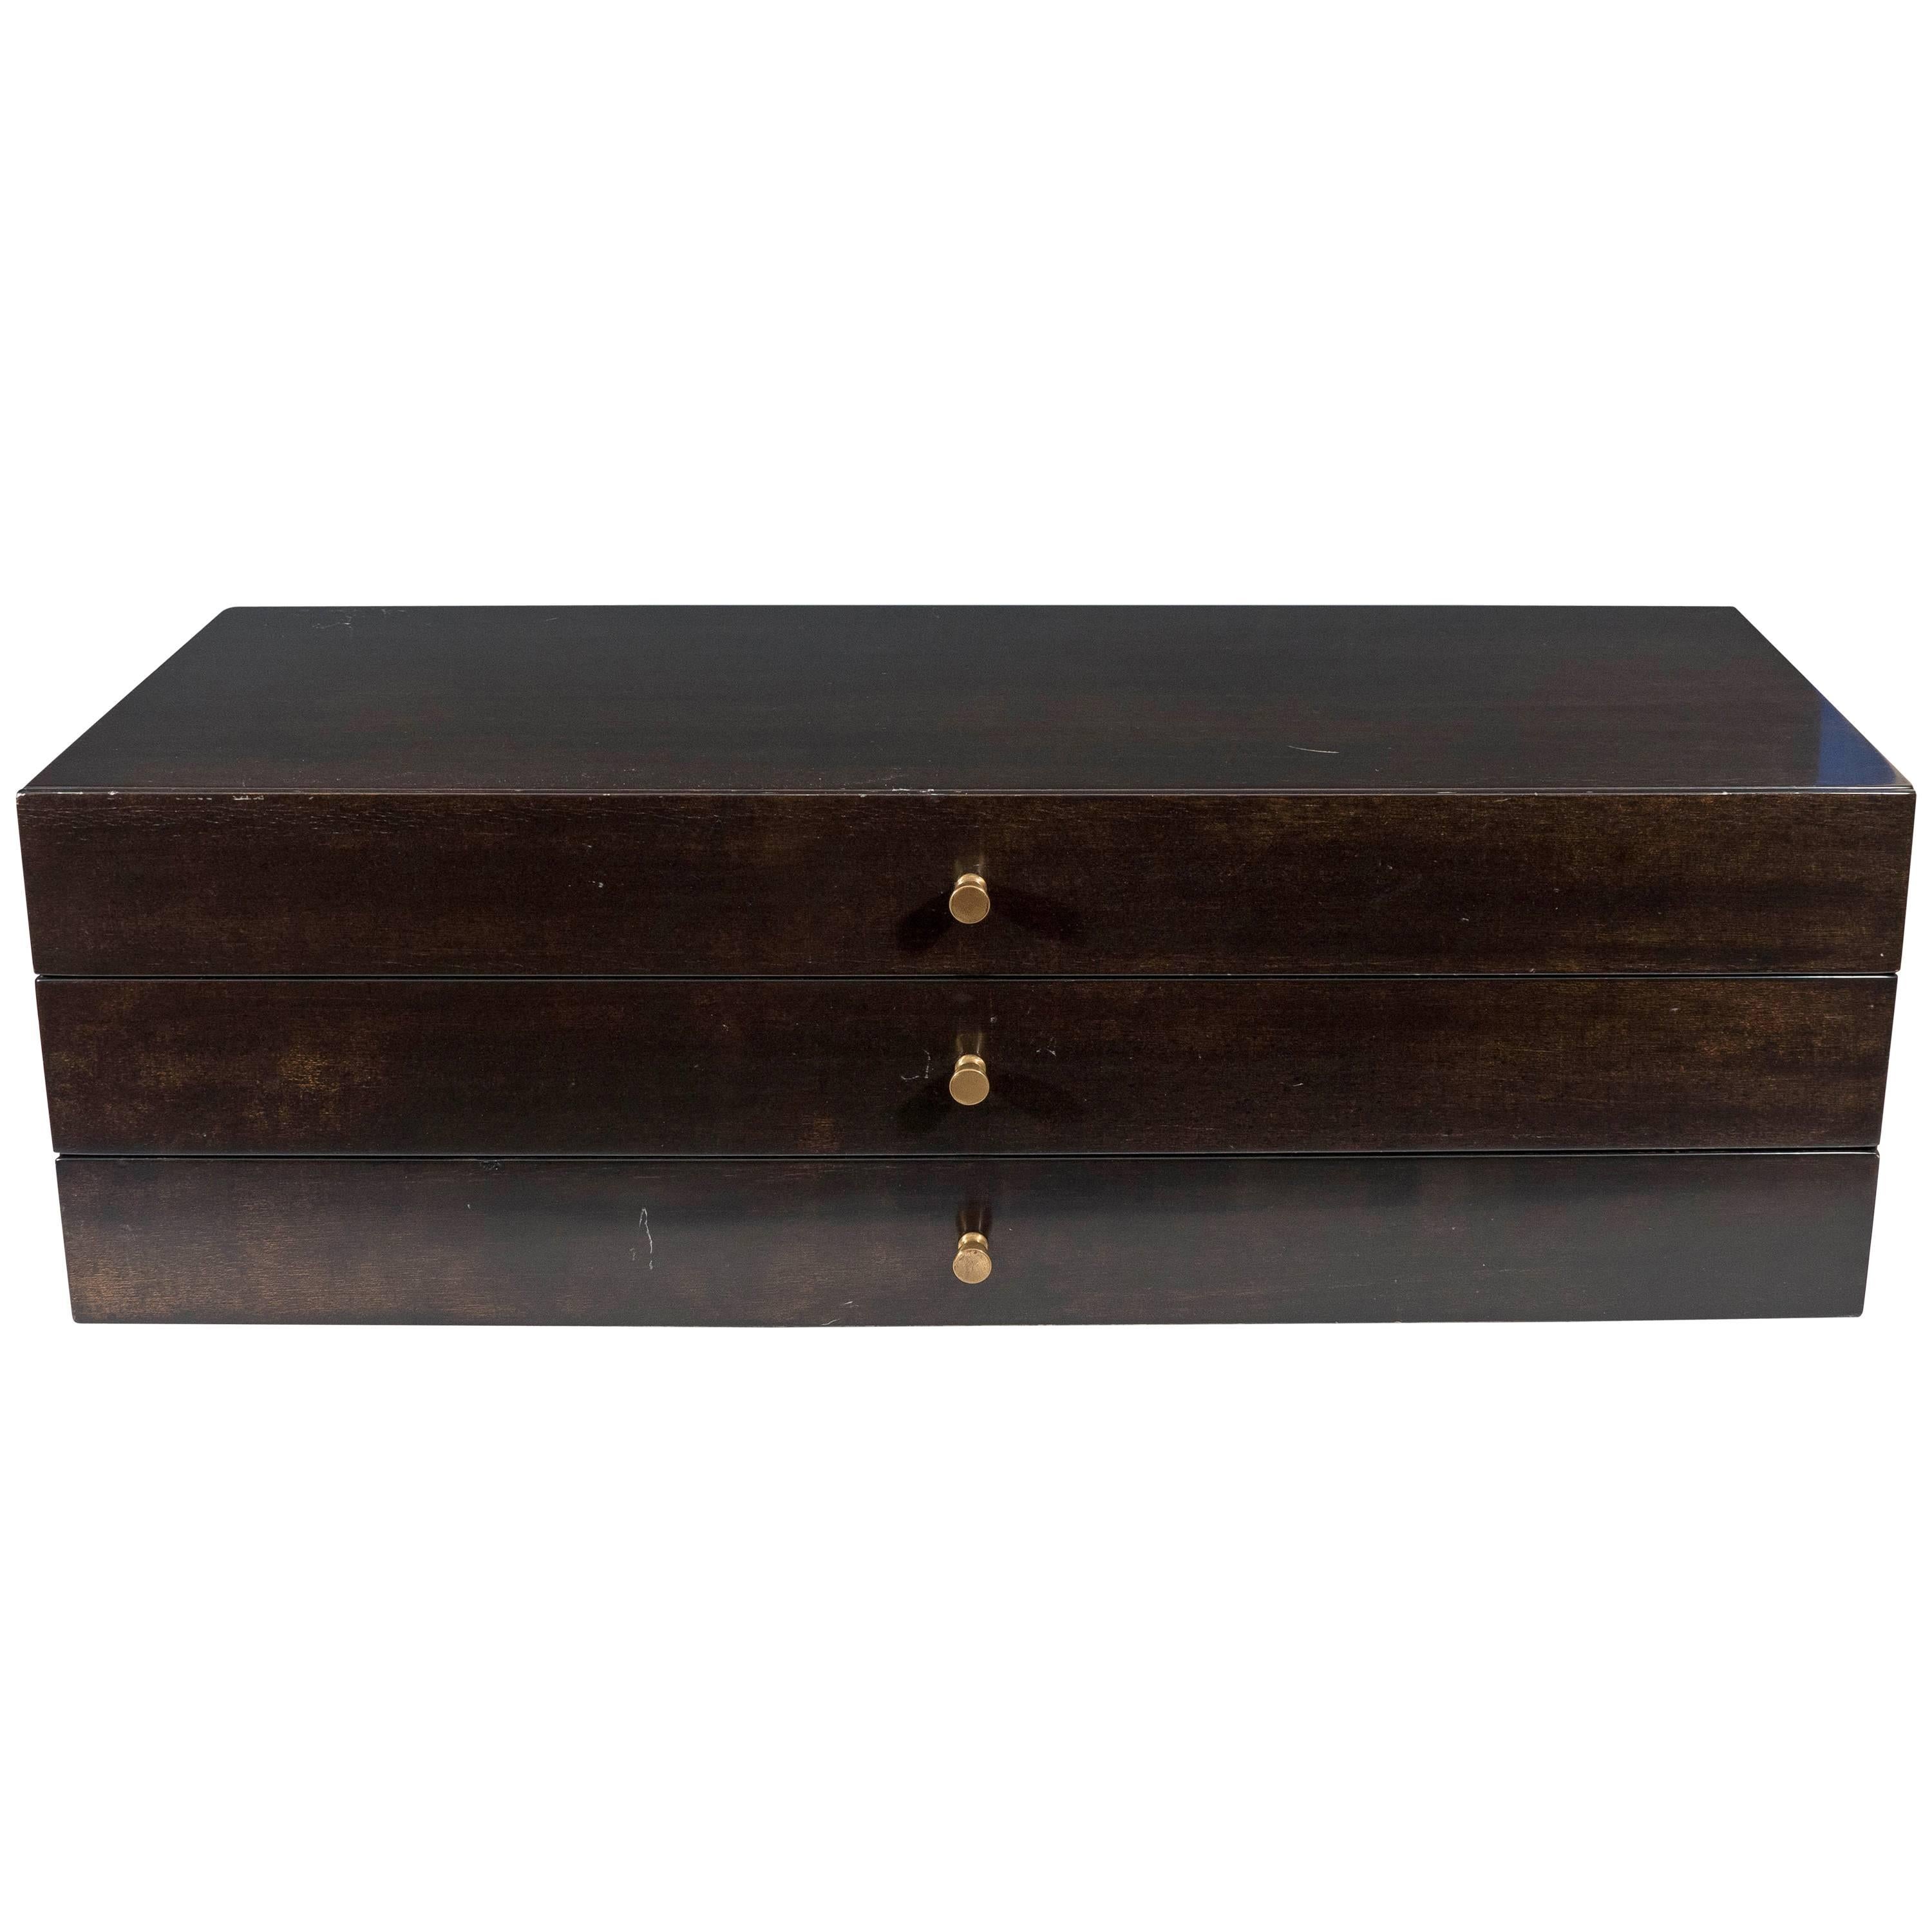 A Paul McCobb Mahogany Jewelry Chest for the Calvin Group-Irwin Collection